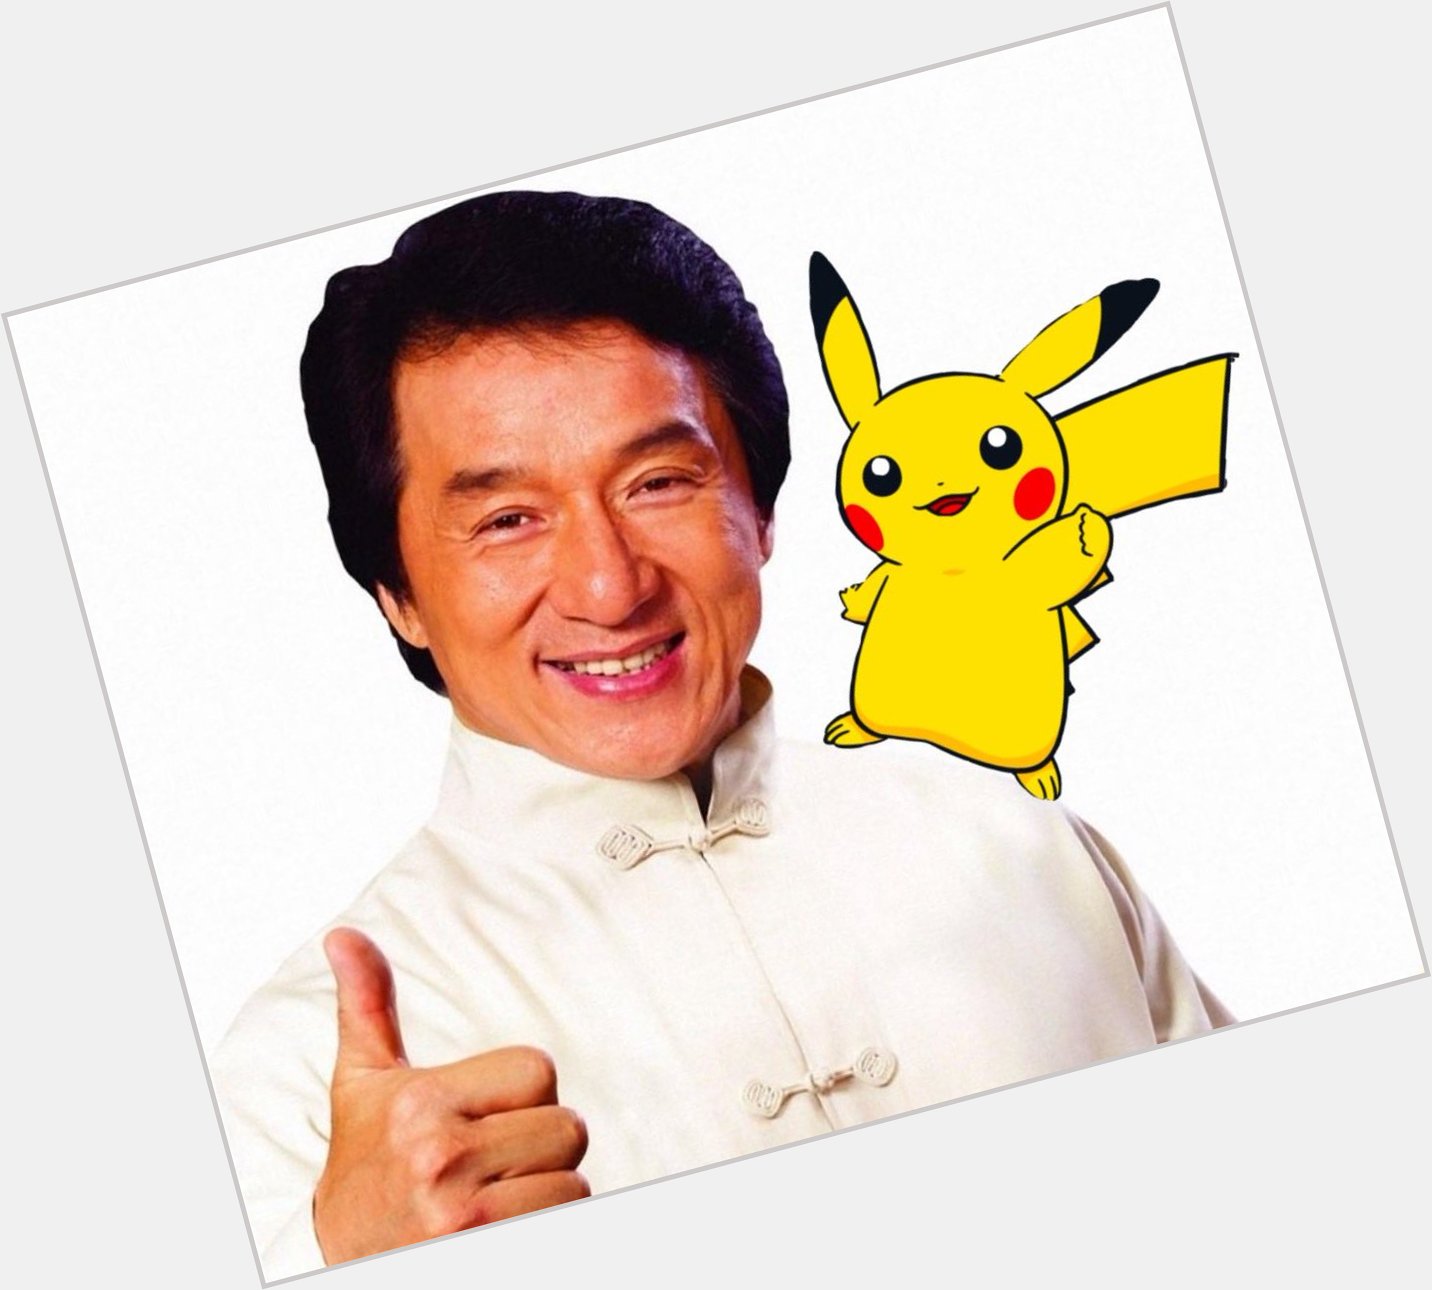 HAPPY BIRTHDAY JACKIE CHAN!! THERE IS NO ONE ELSE I WOULD WANT TO SHARE A BIRTHDAY WITH 